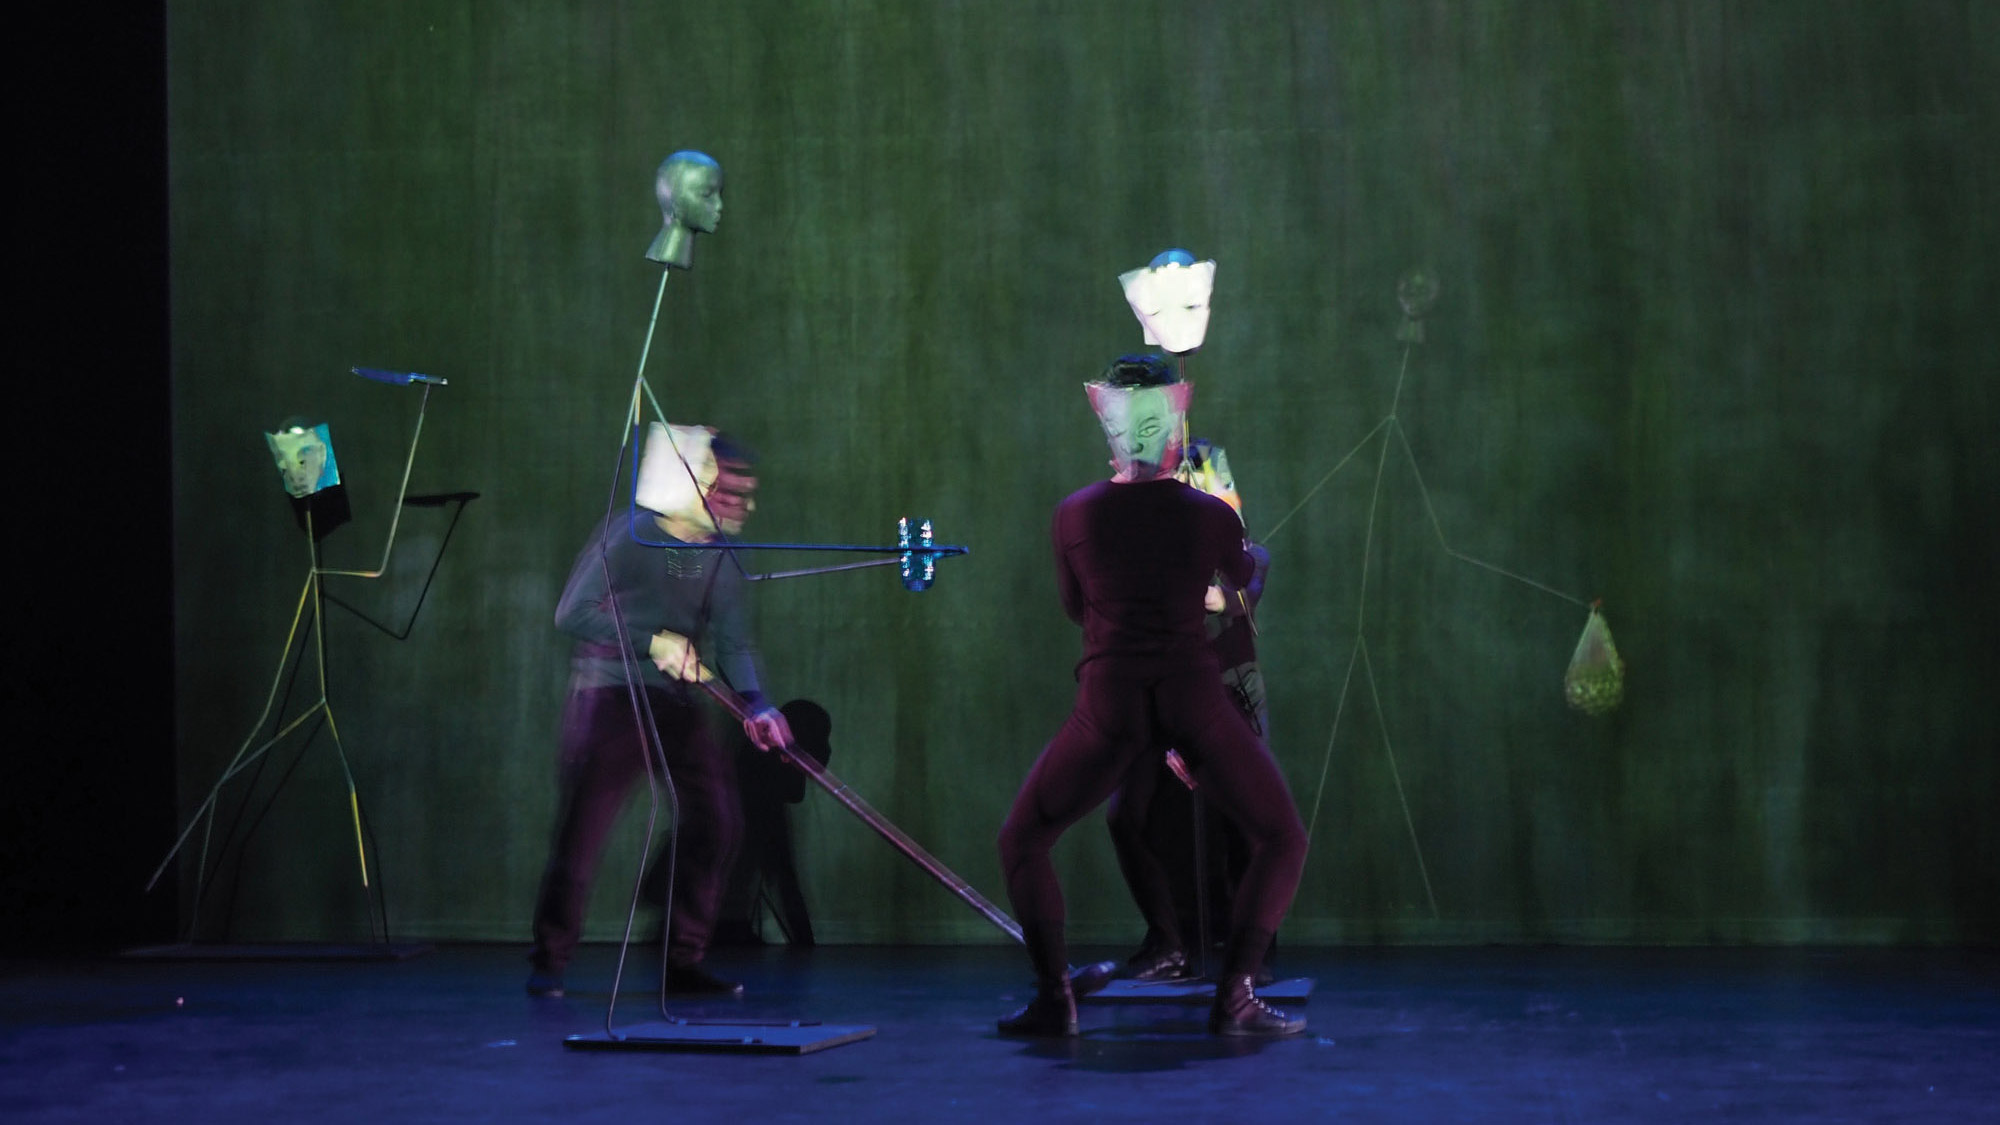 Two people preforming with various humanoid sculptures on a blue and green stage. 